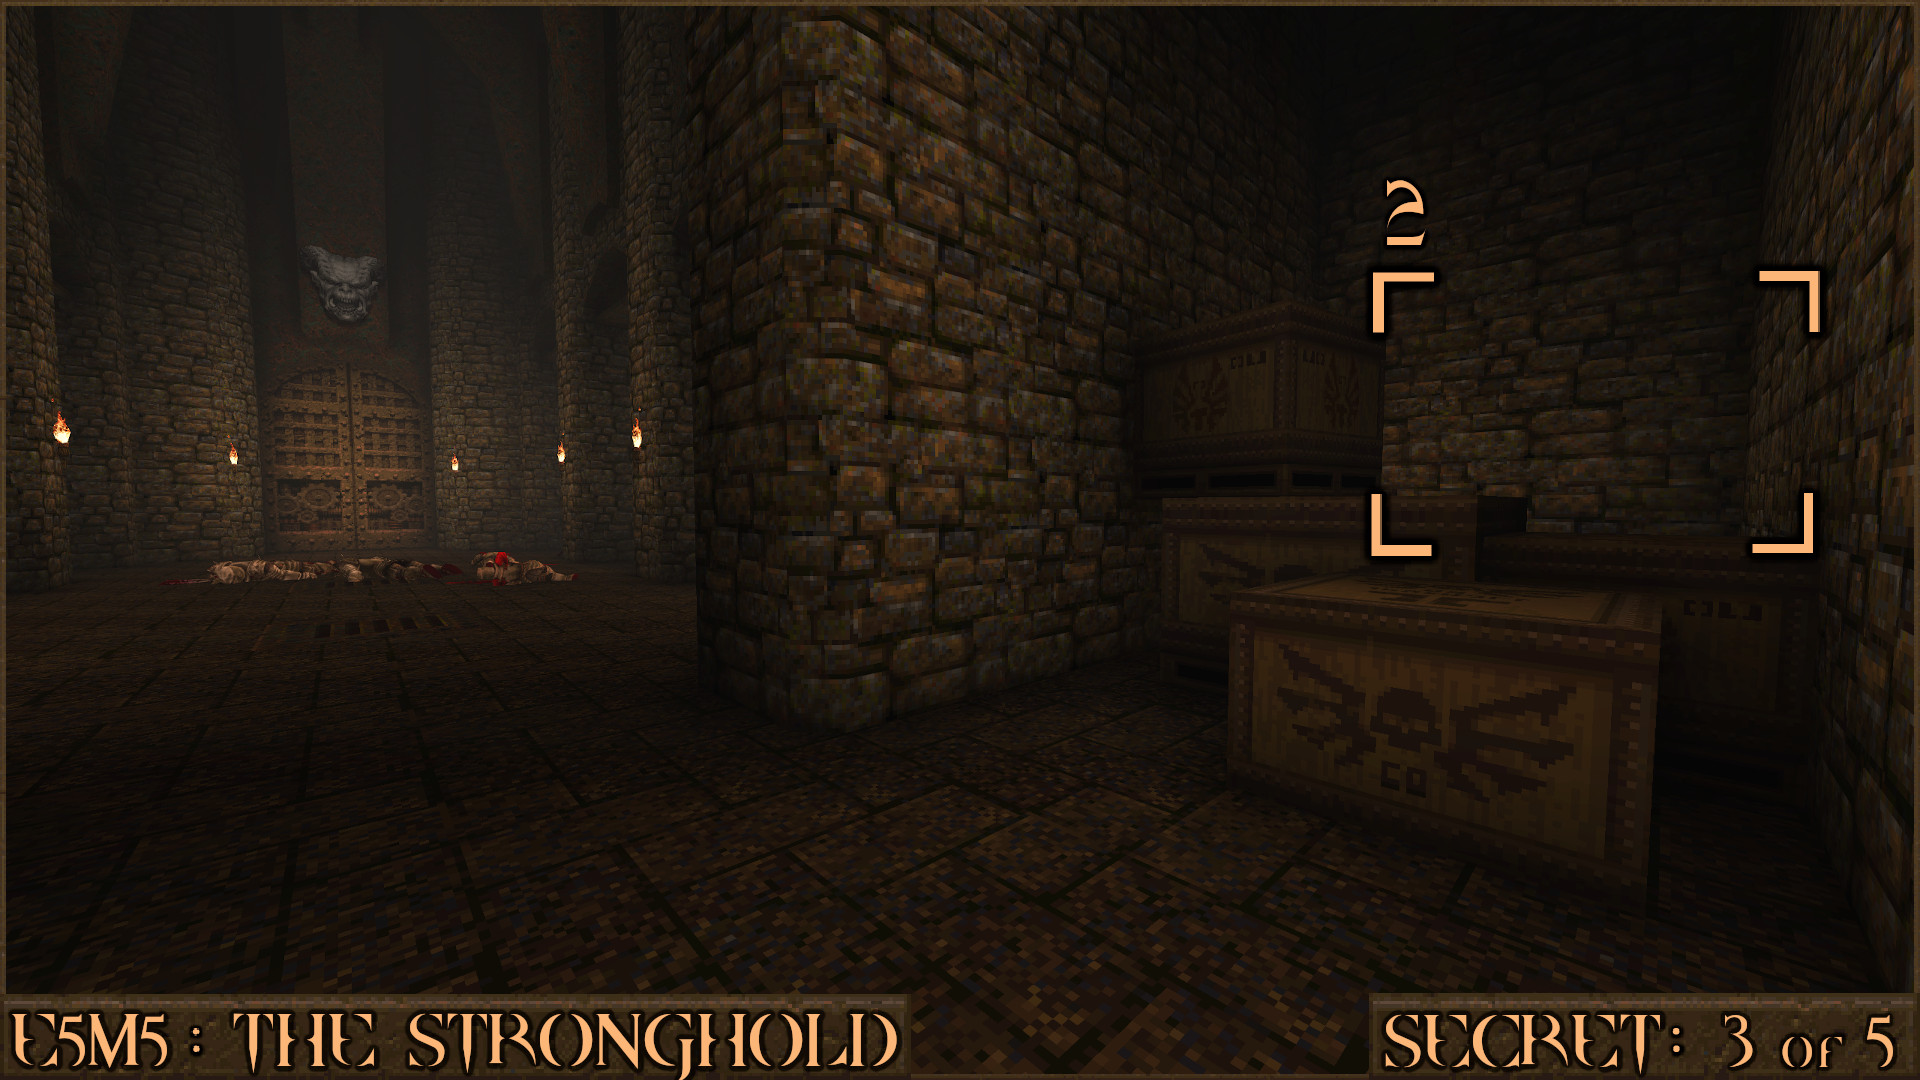 Quake Finding All Secrets in Quake Expansion pack: Dimension of the Past - E5M5: The Stronghold - 274F754